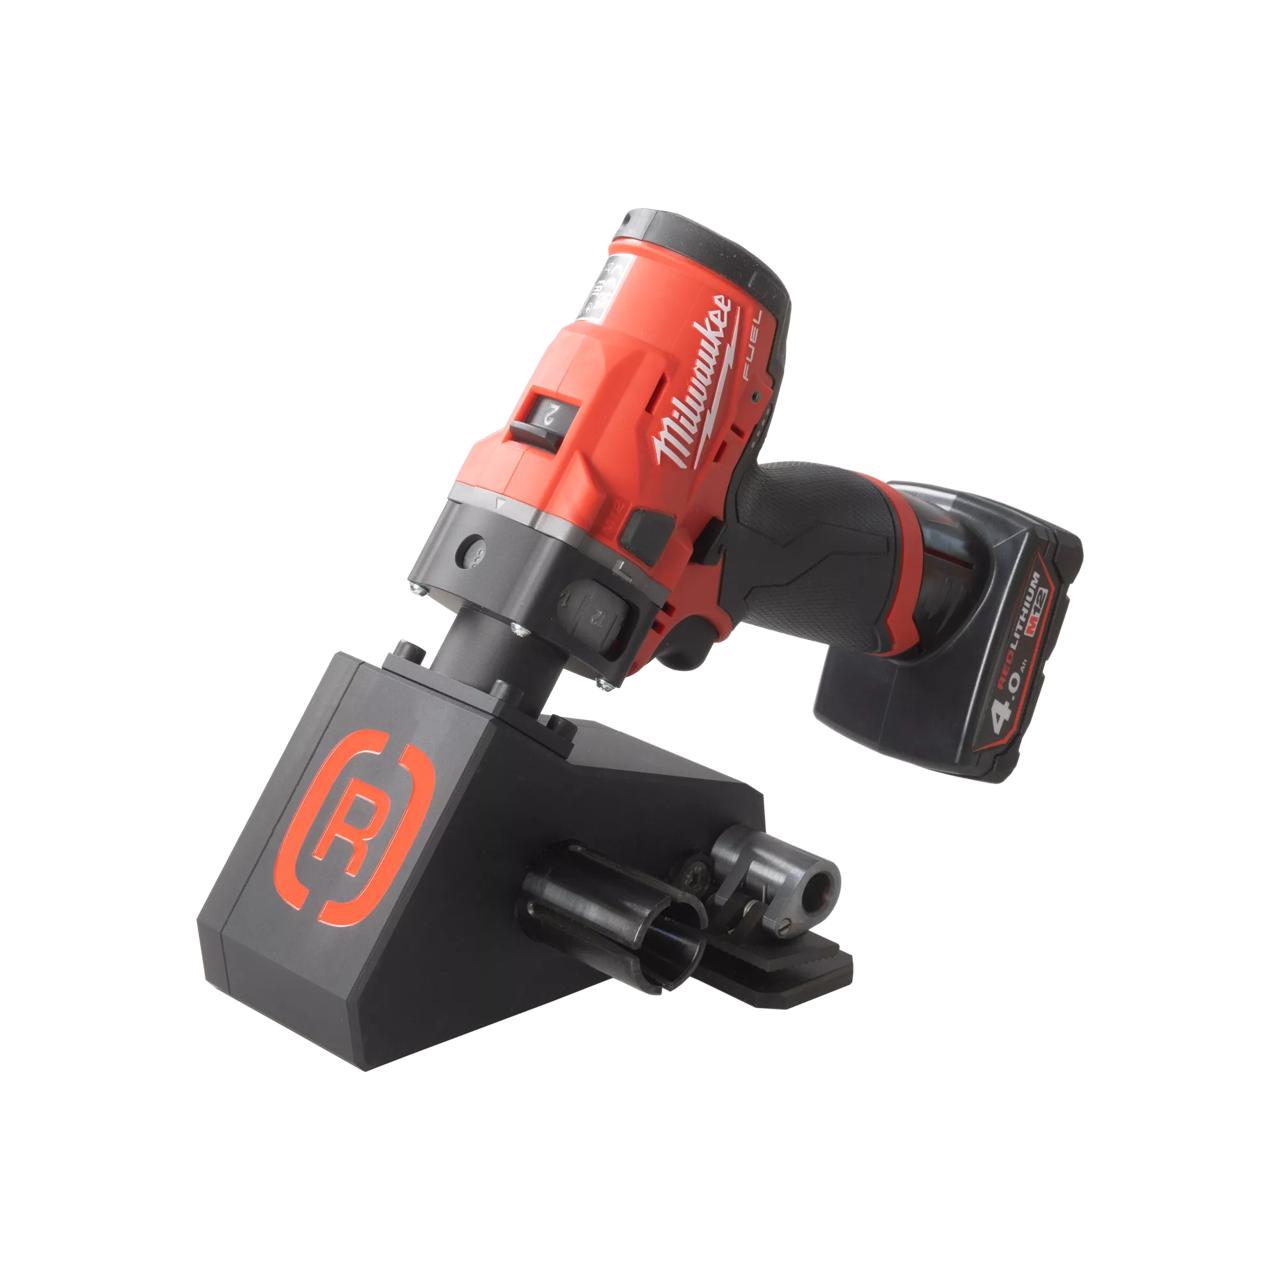 LT38e Strapping tool, Battery powered